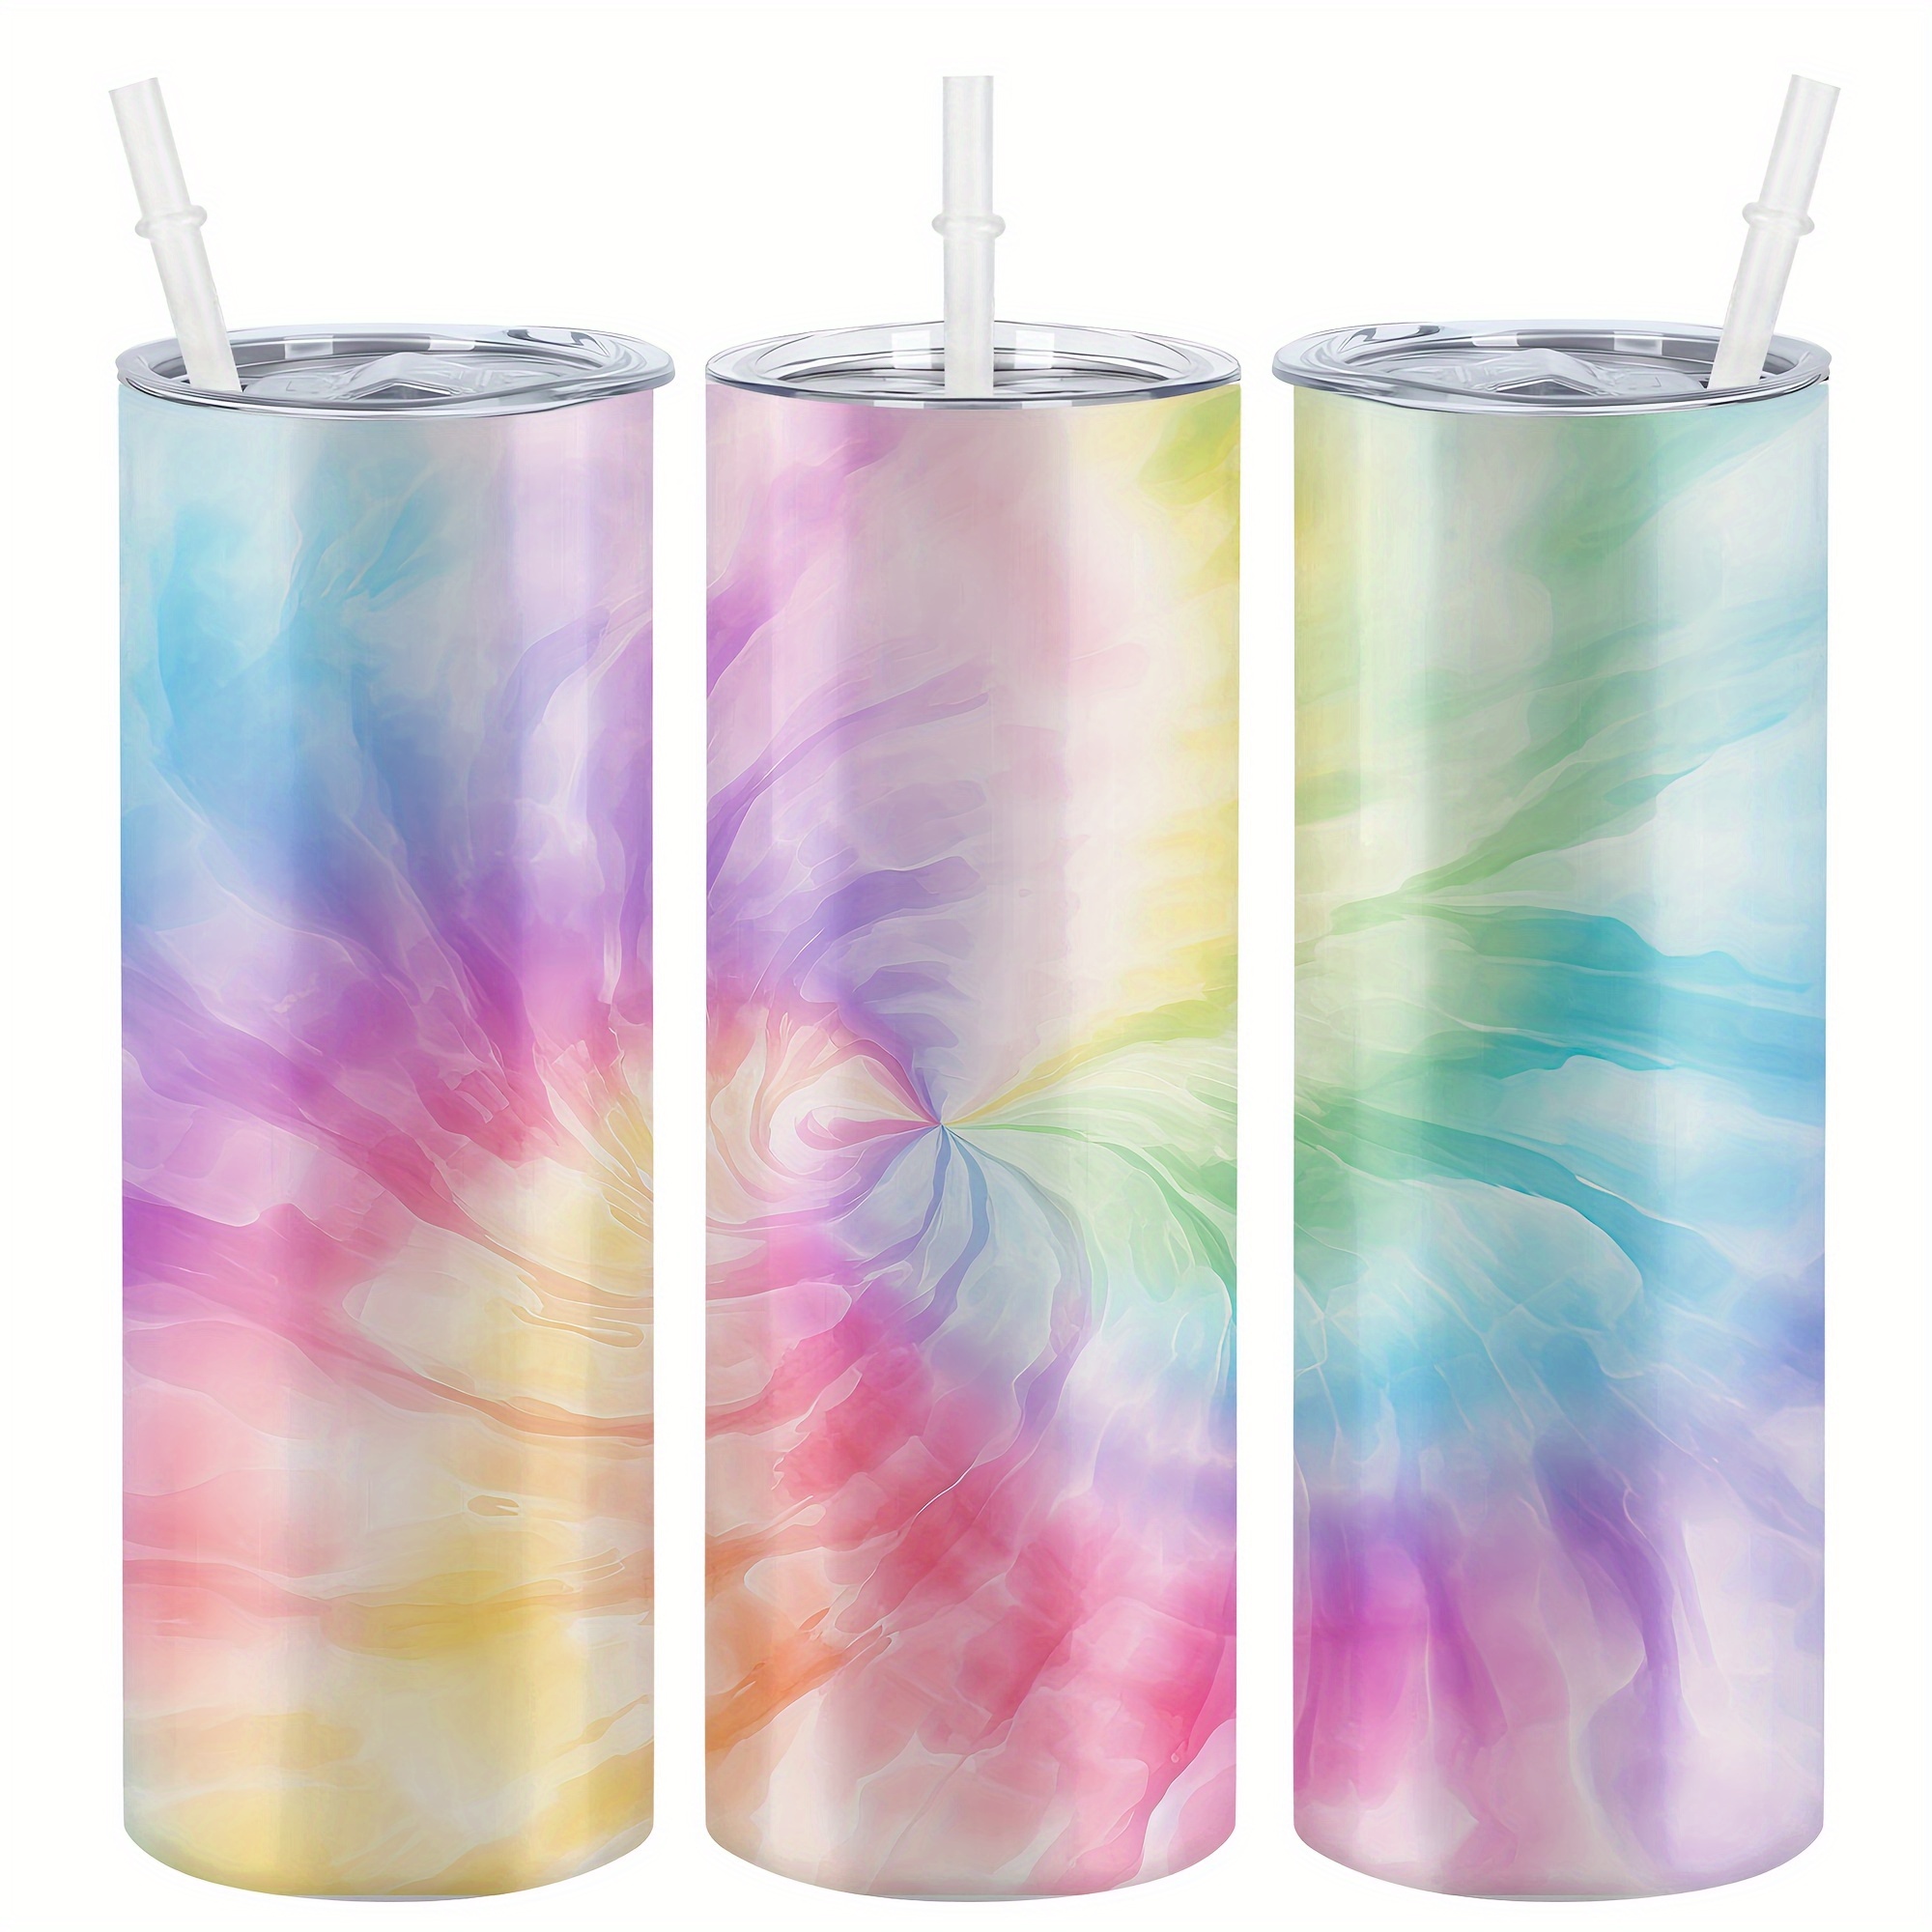 

1pc, 20oz Stainless Steel Tumblers With Lids And Straws, Insulated Water Bottles, Swirl Tie-dye Design, Ideal For Hot & Cold Drinks, Outdoor Travel Drinkware, Summer Essentials